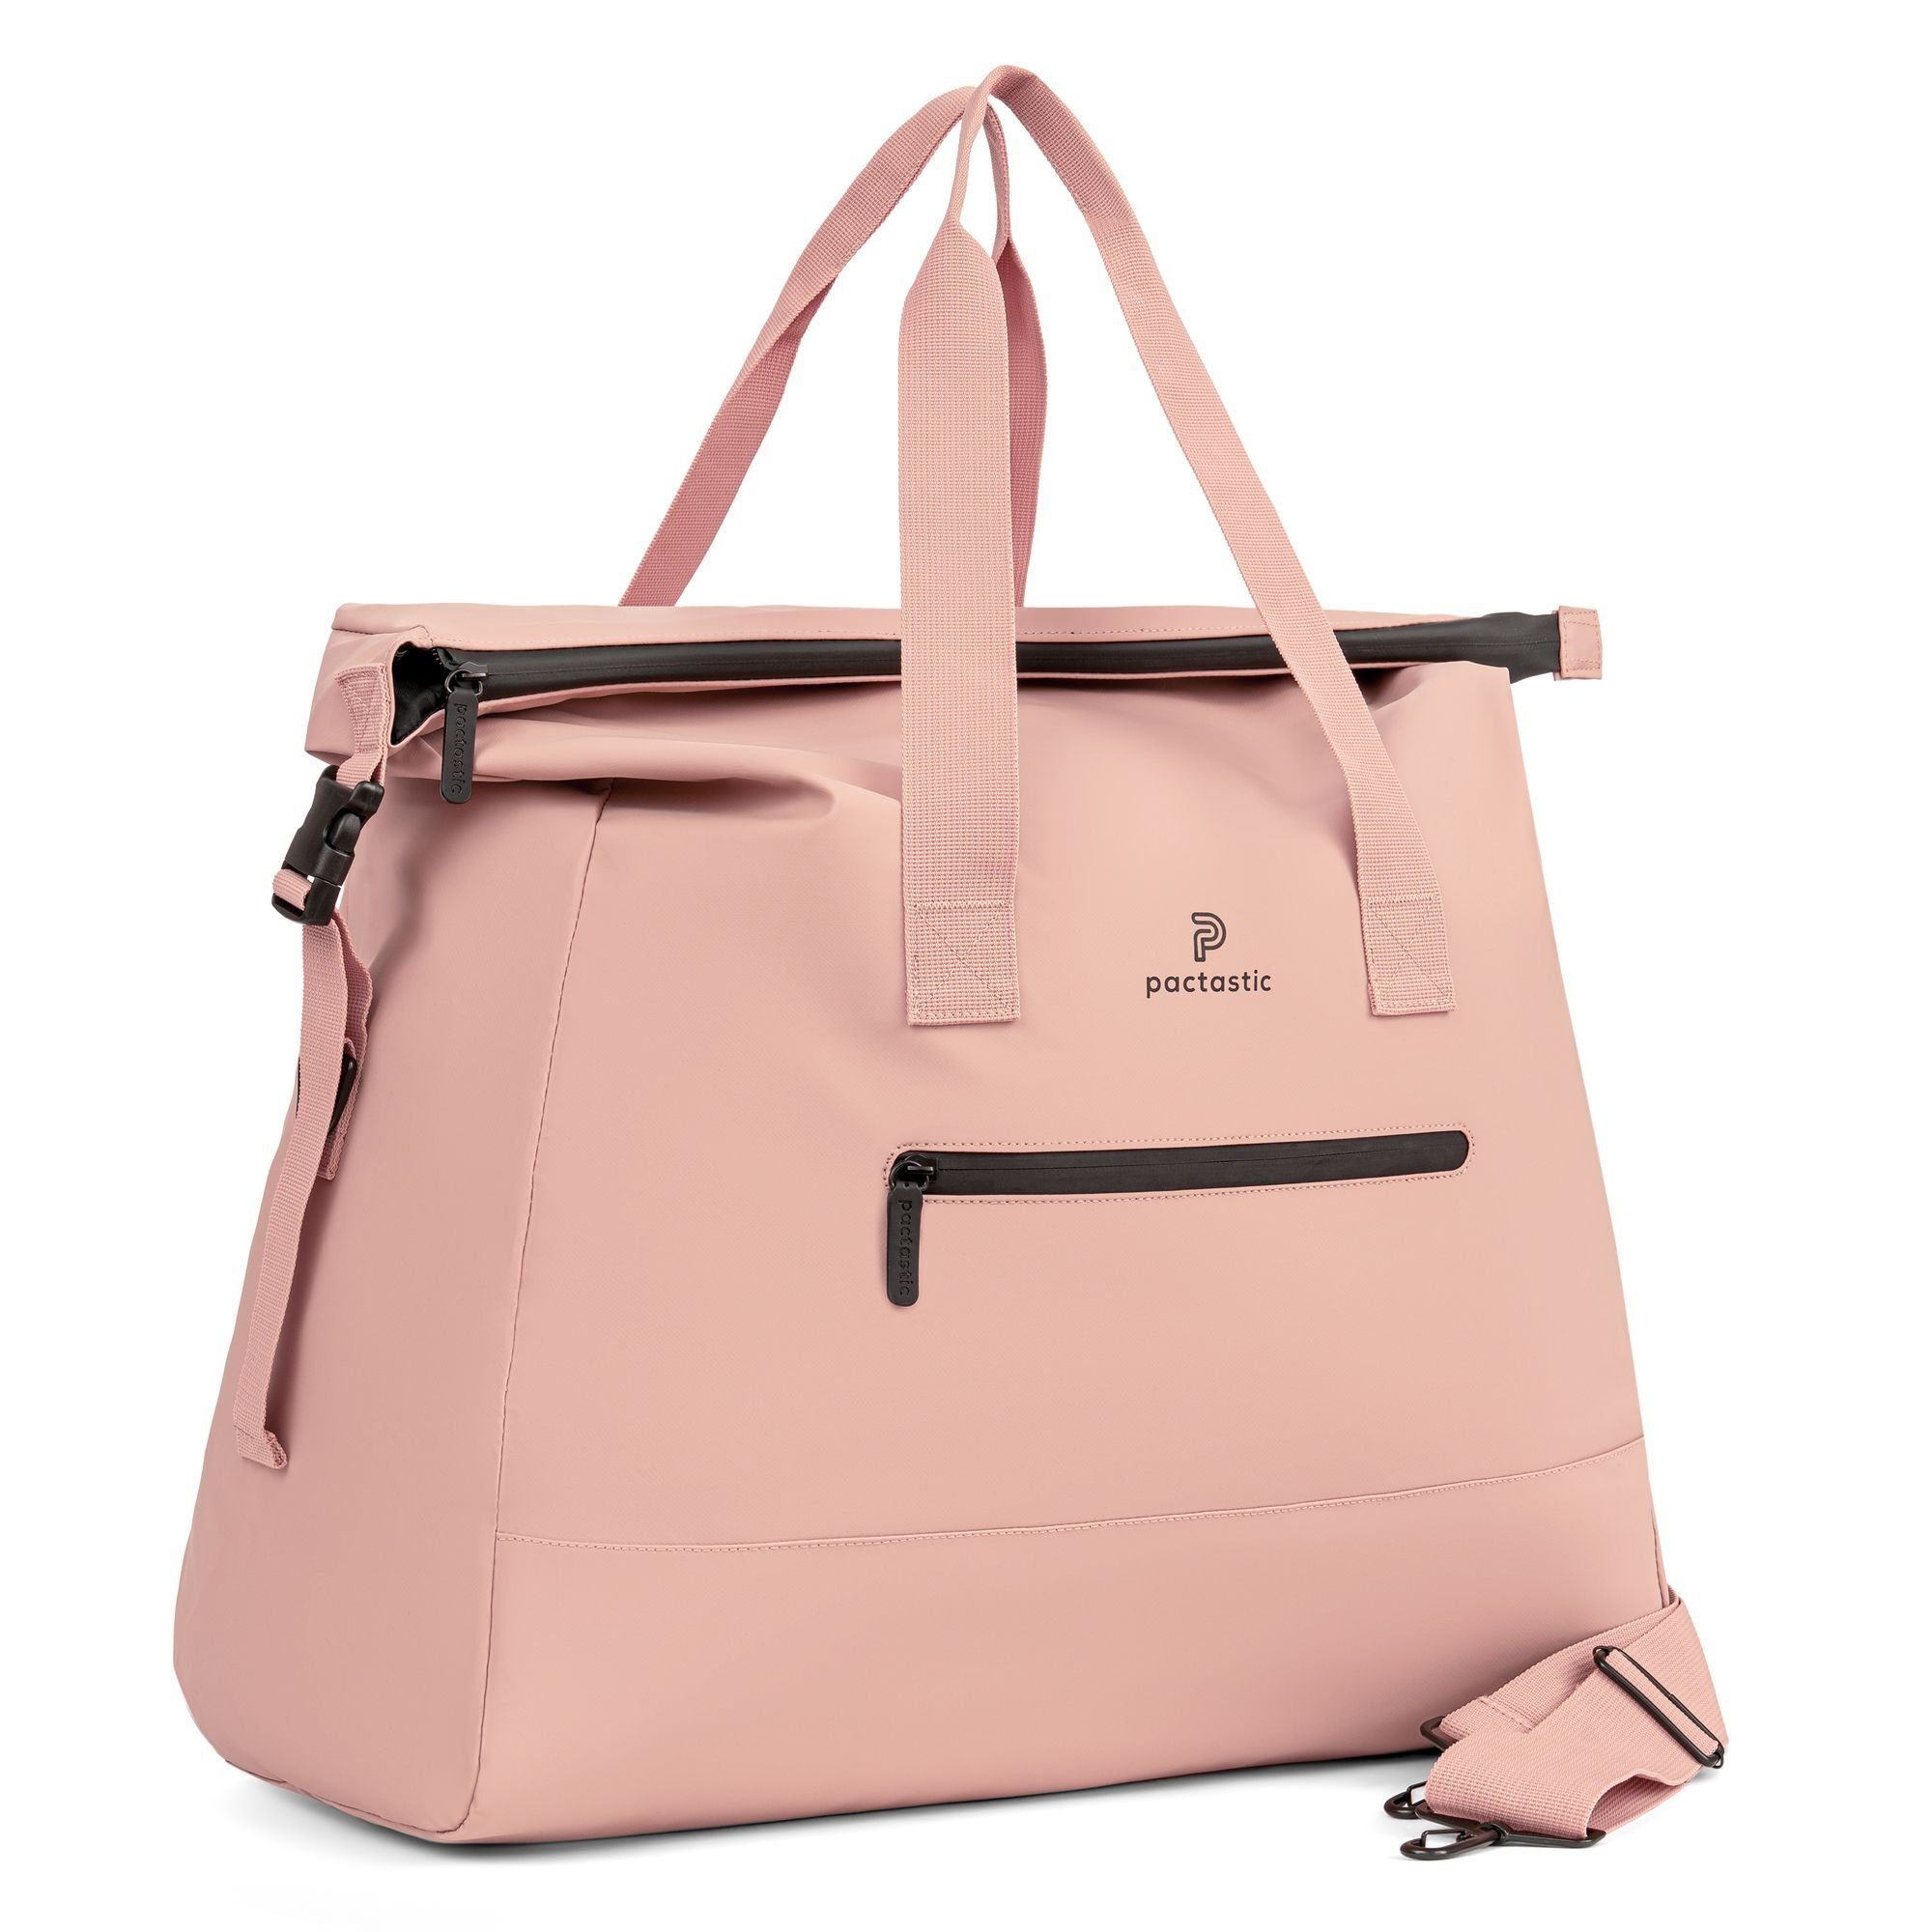 Pactastic Weekender Veganes Tech-Material Urban Collection, rose